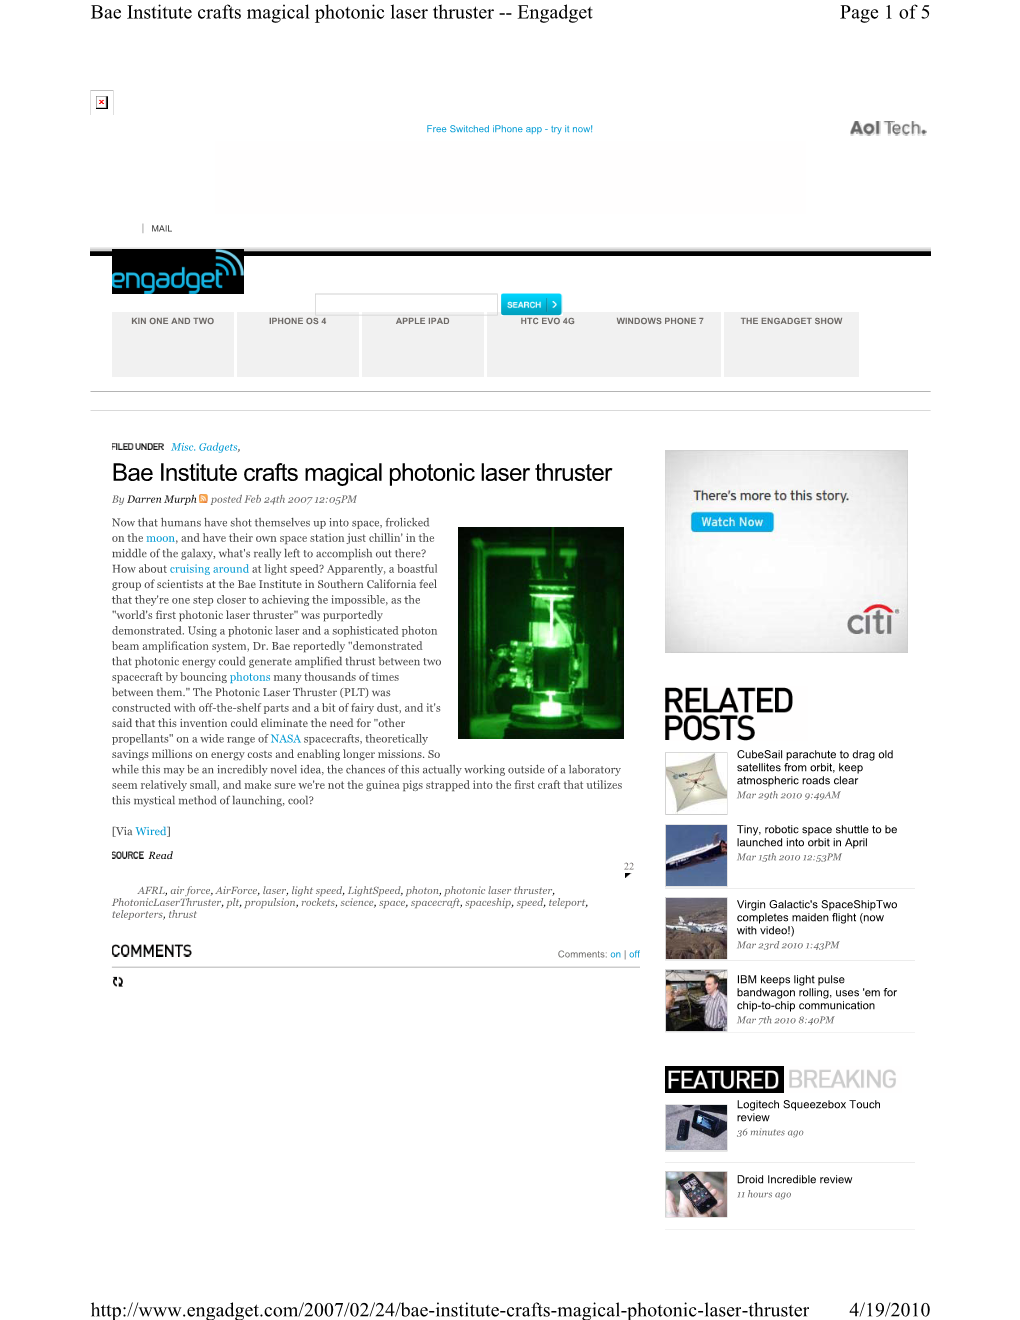 Bae Institute Crafts Magical Photonic Laser Thruster -- Engadget Page 1 of 5